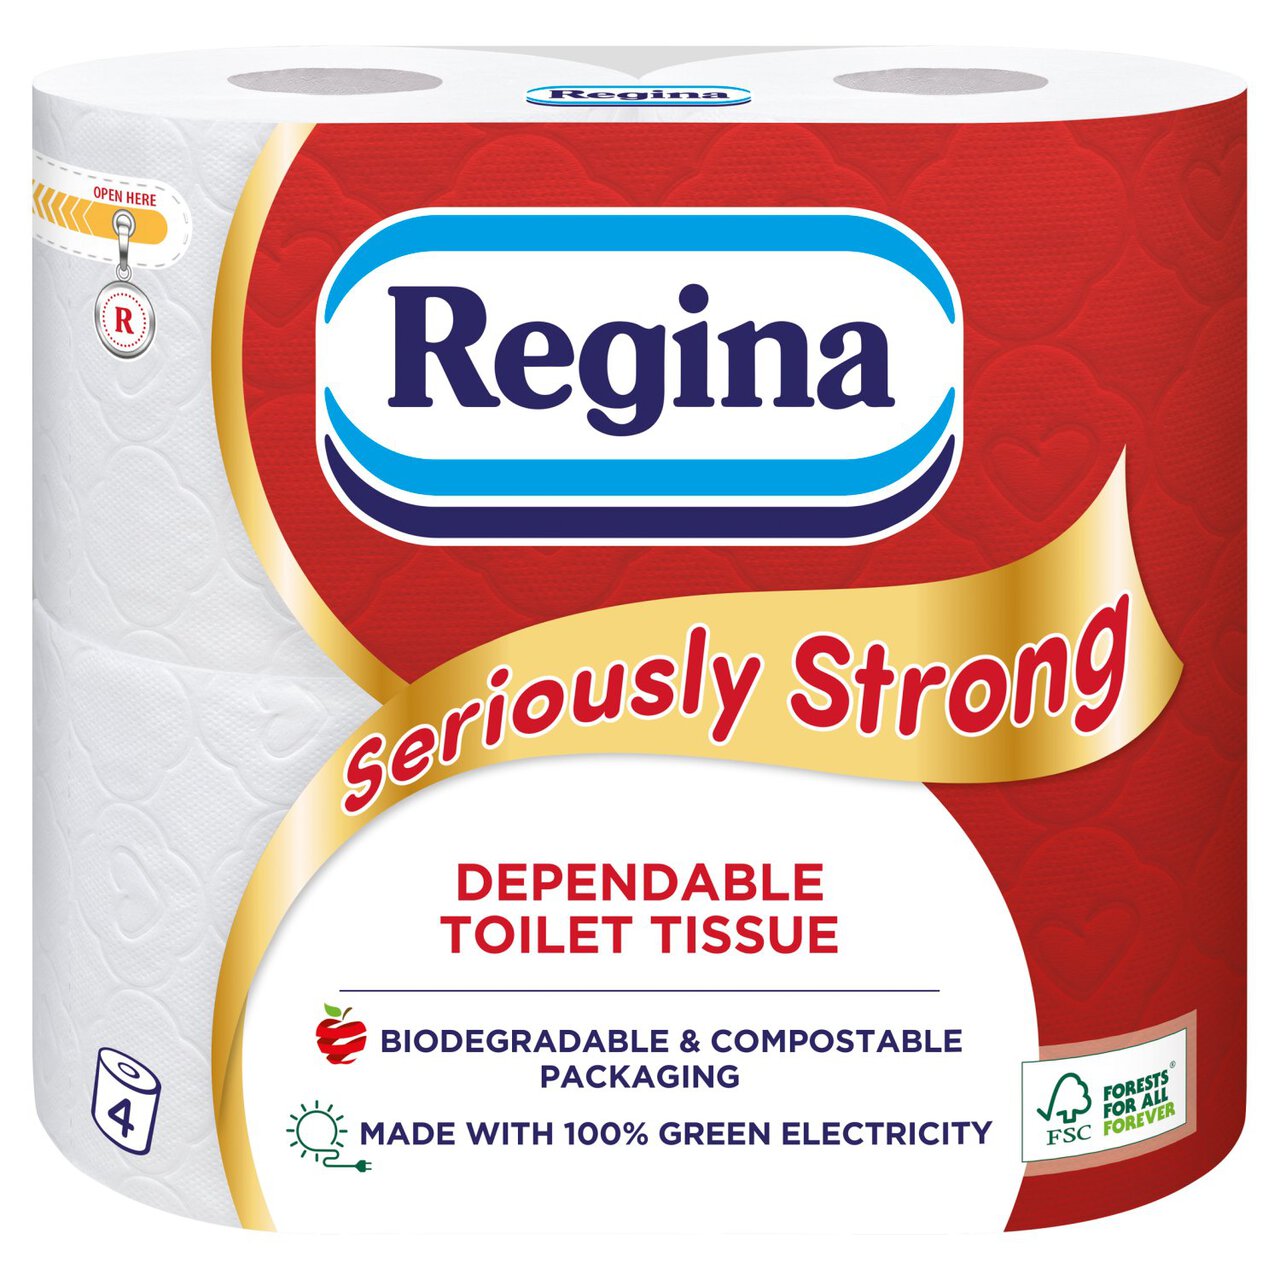 Regina Seriously Strong Toilet Tissue 4 per pack